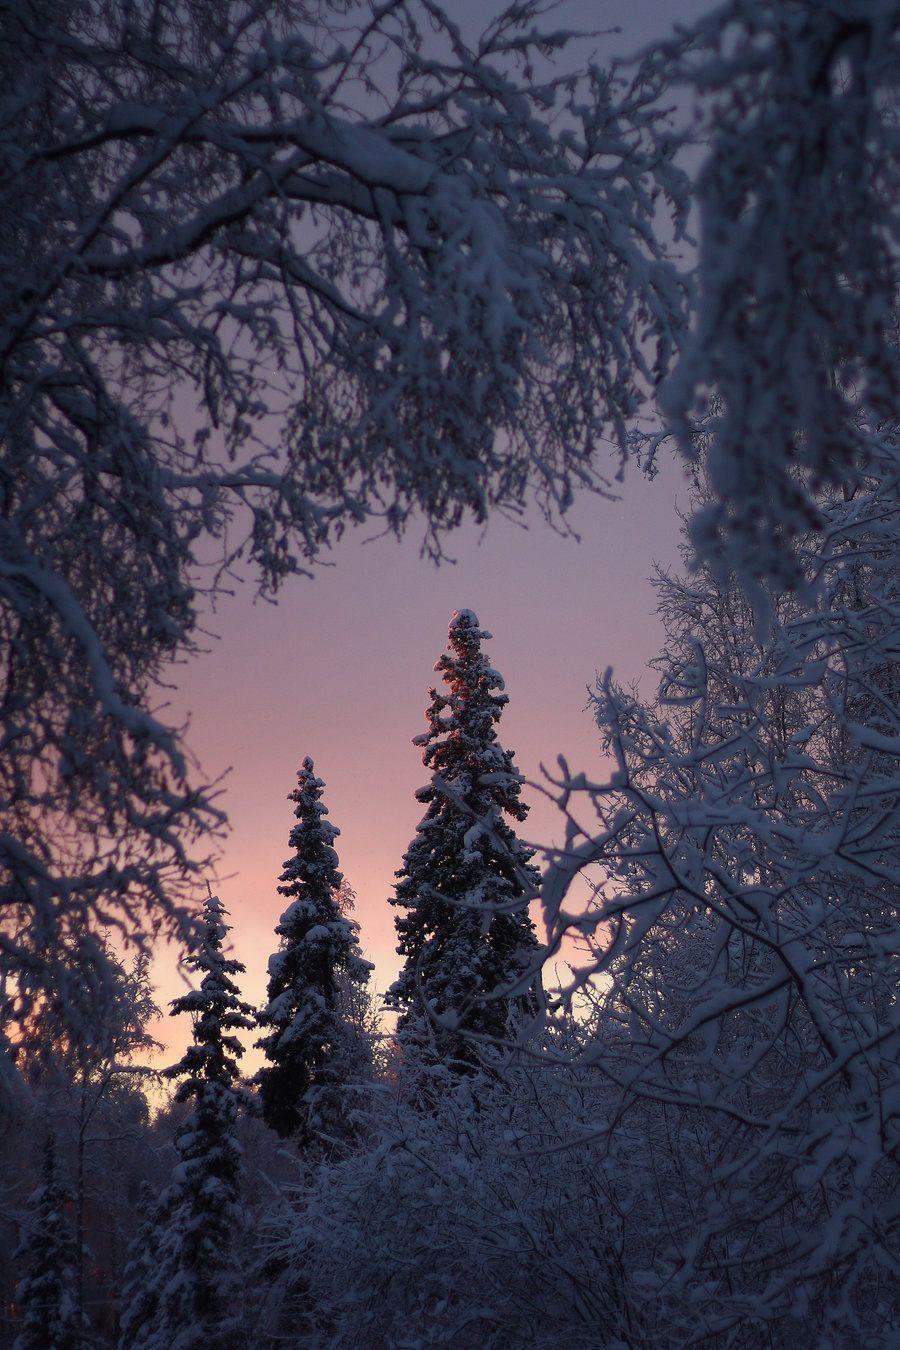 Enchanted Winter Evening. Snowy landscapes